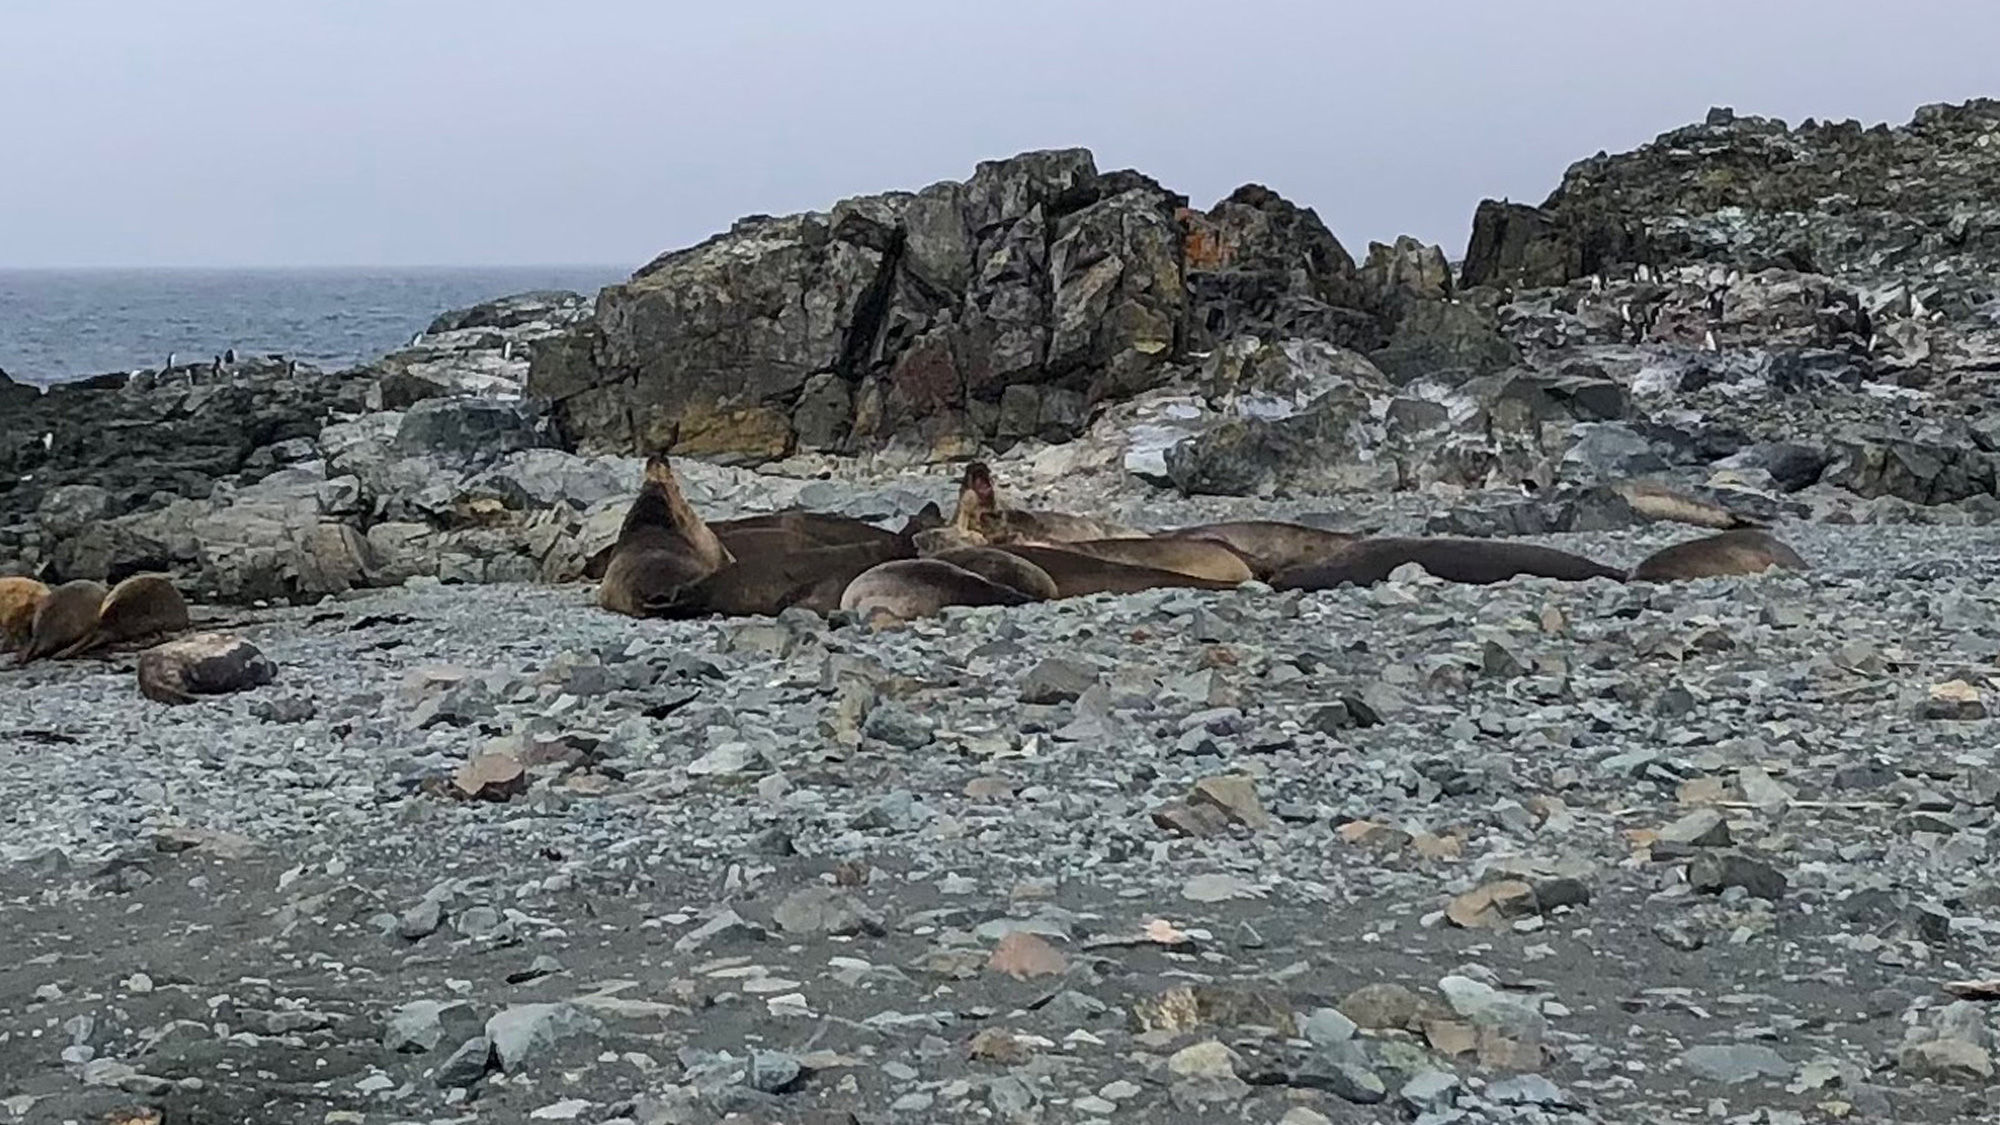 A group of elephant seals lying on the rocks.